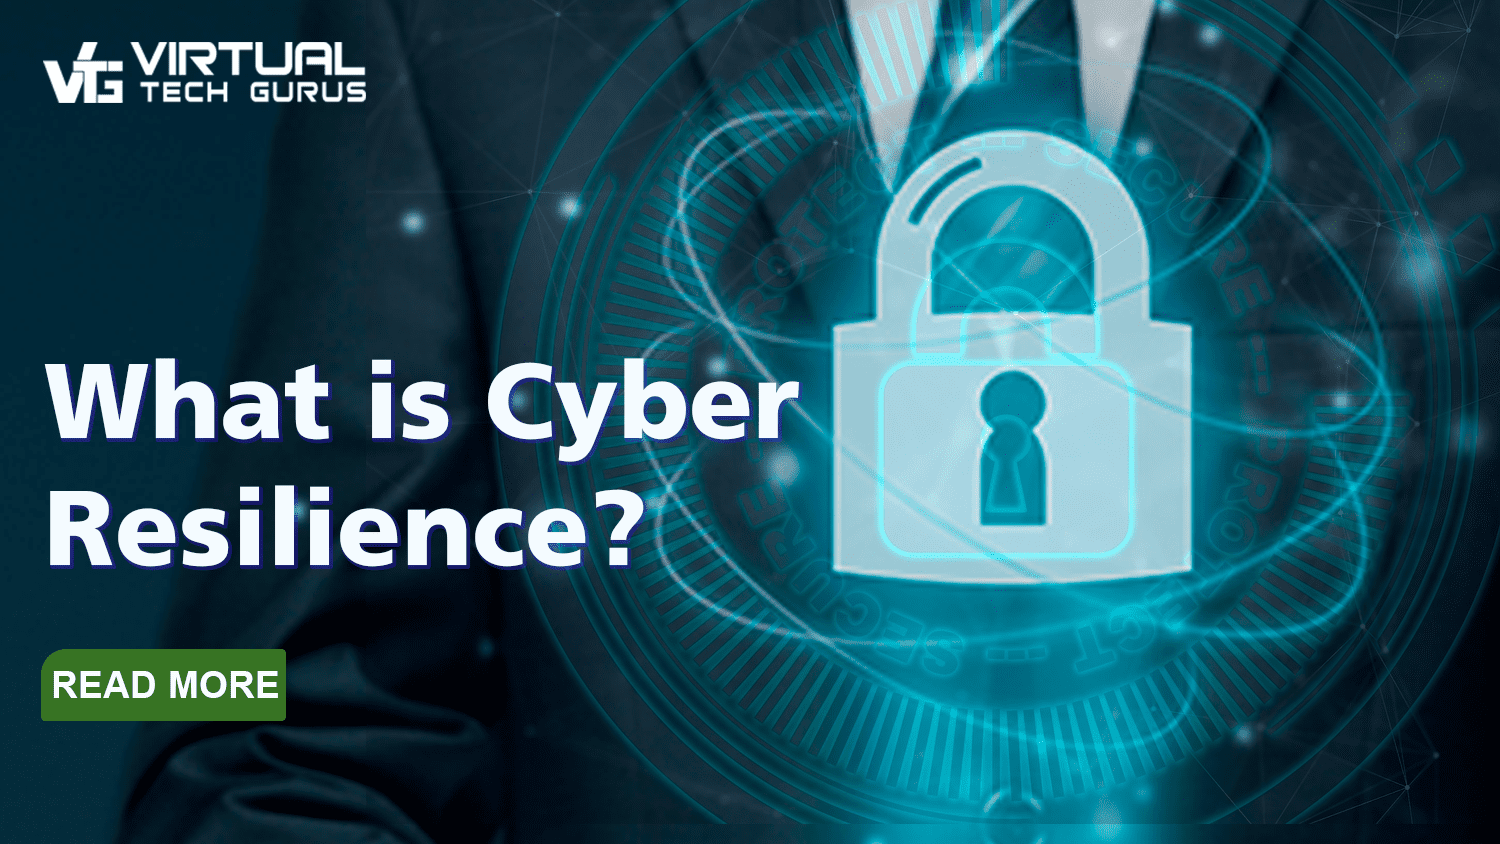 What is Cyber Resilience? Virtual Tech Gurus